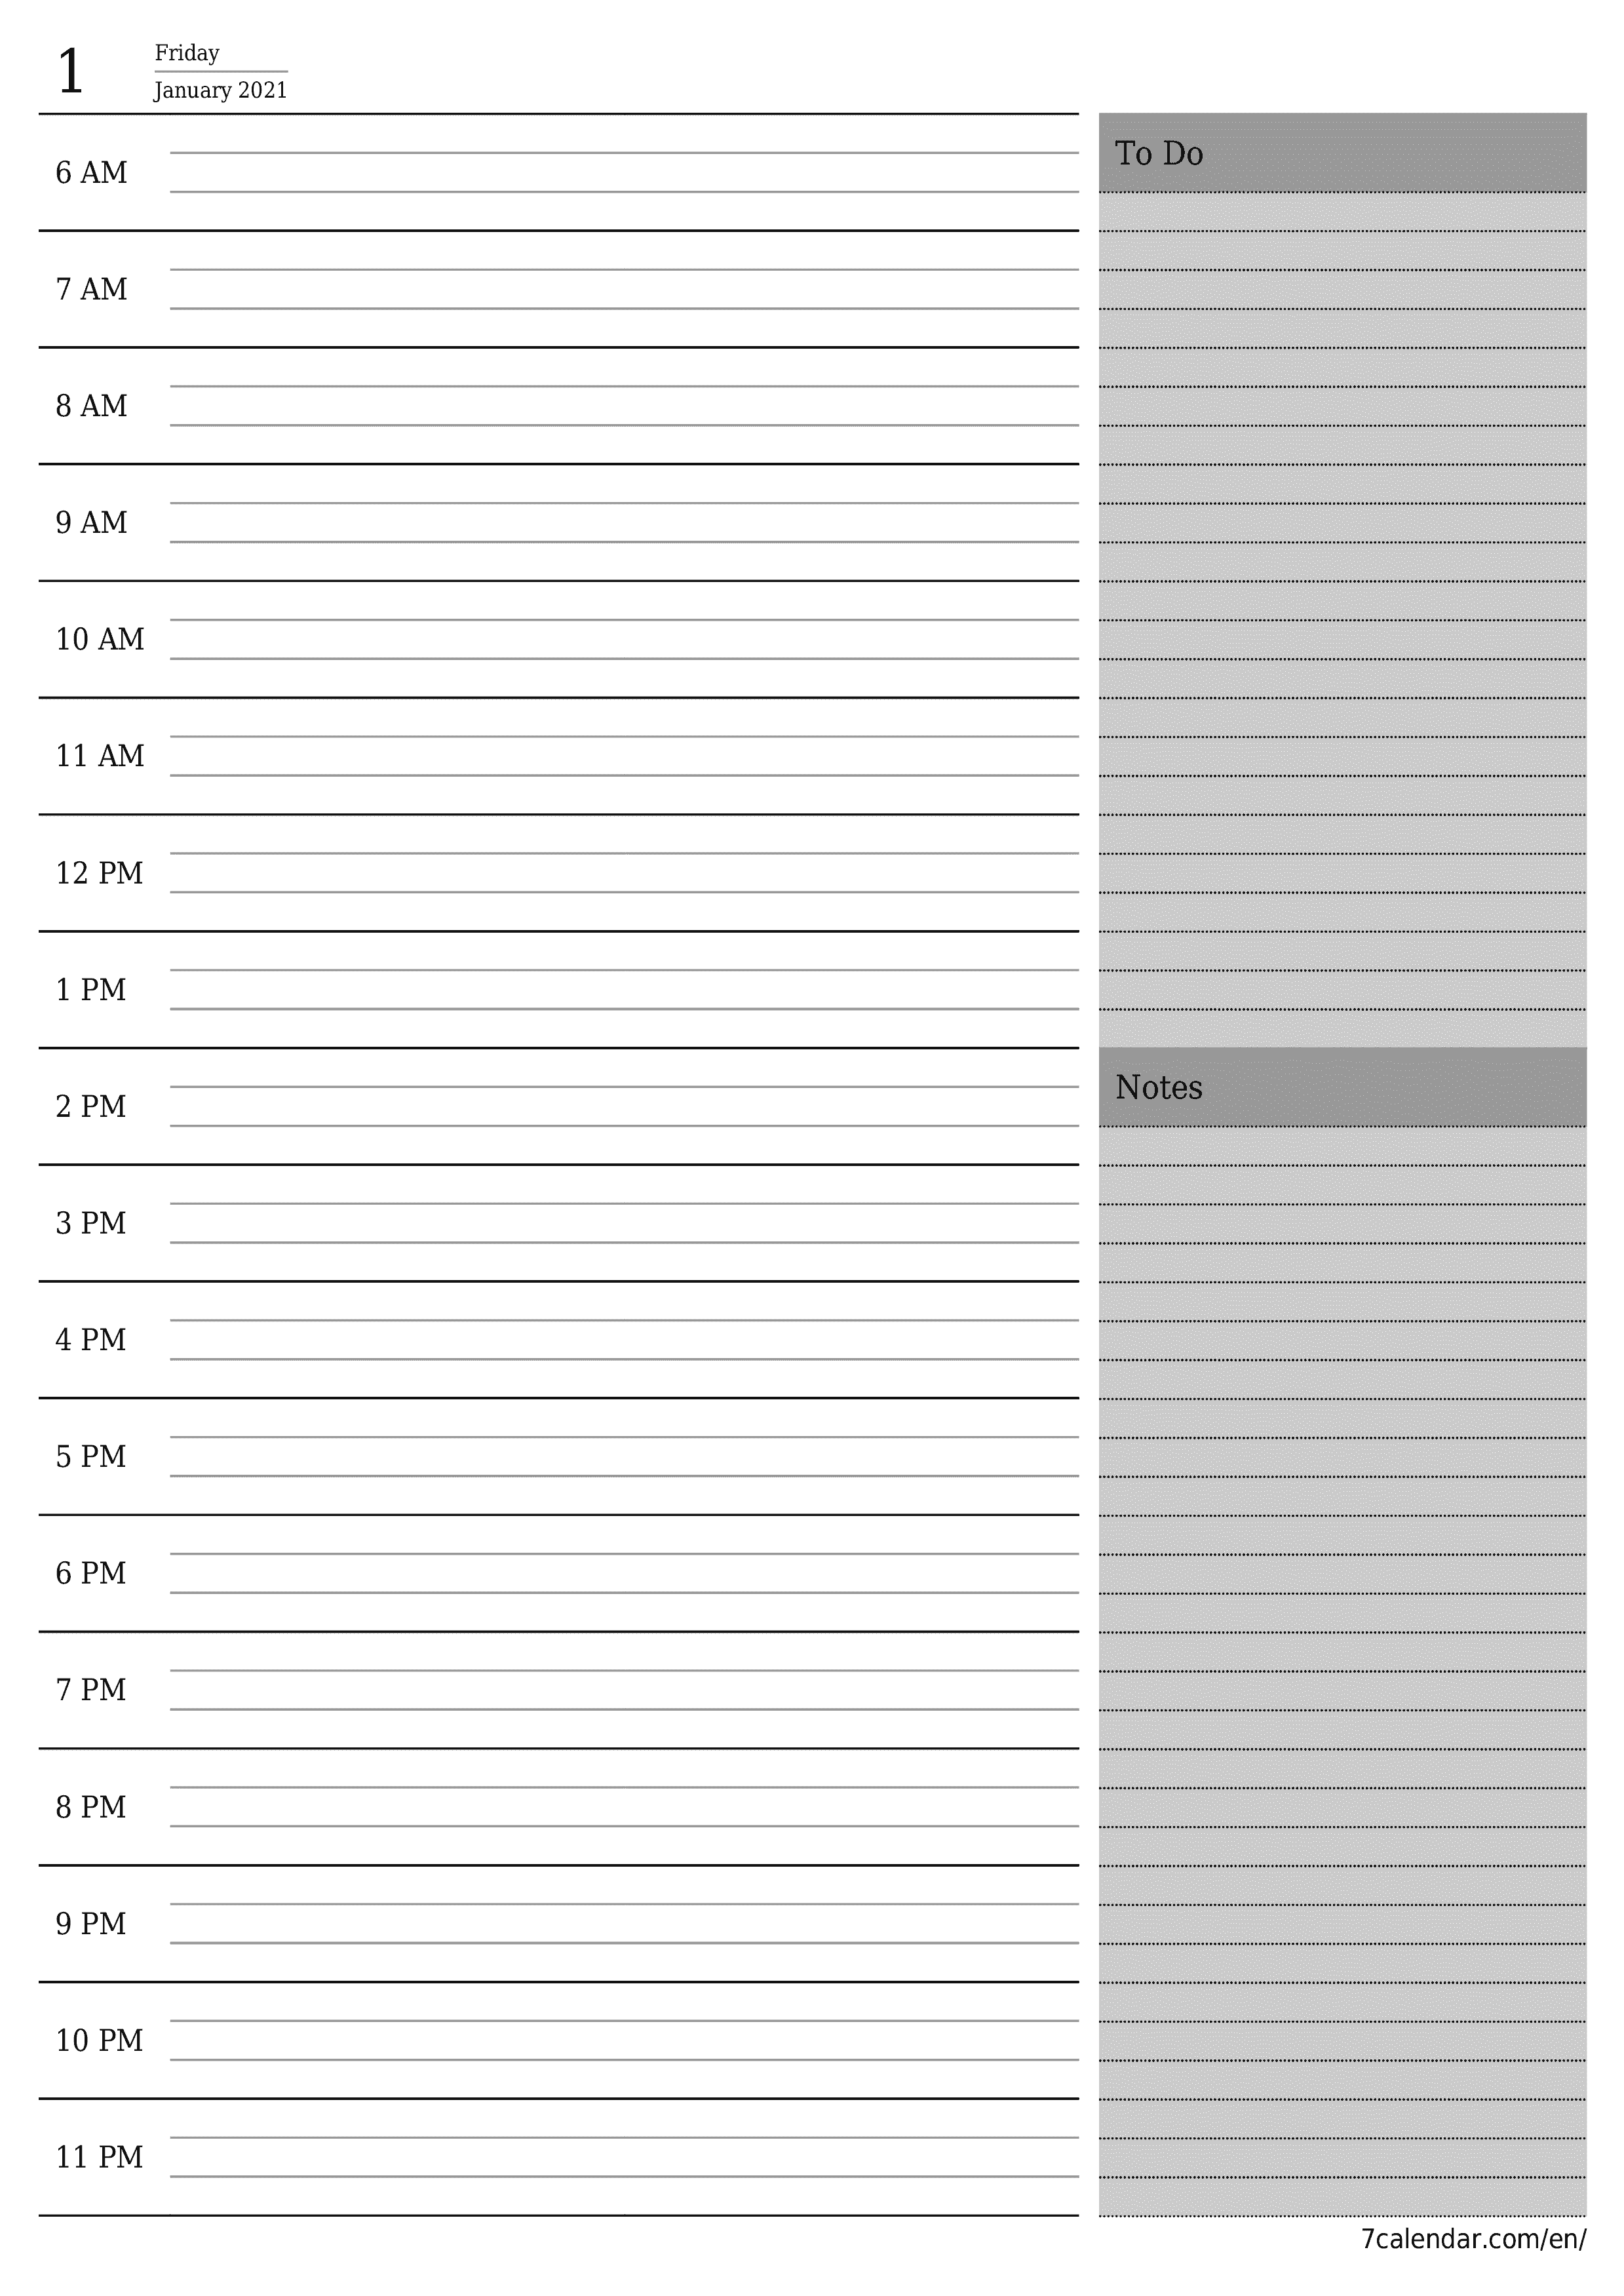 Blank daily calendar planner for day January 2021 with notes, save and print to PDF PNG English - 7calendar.com